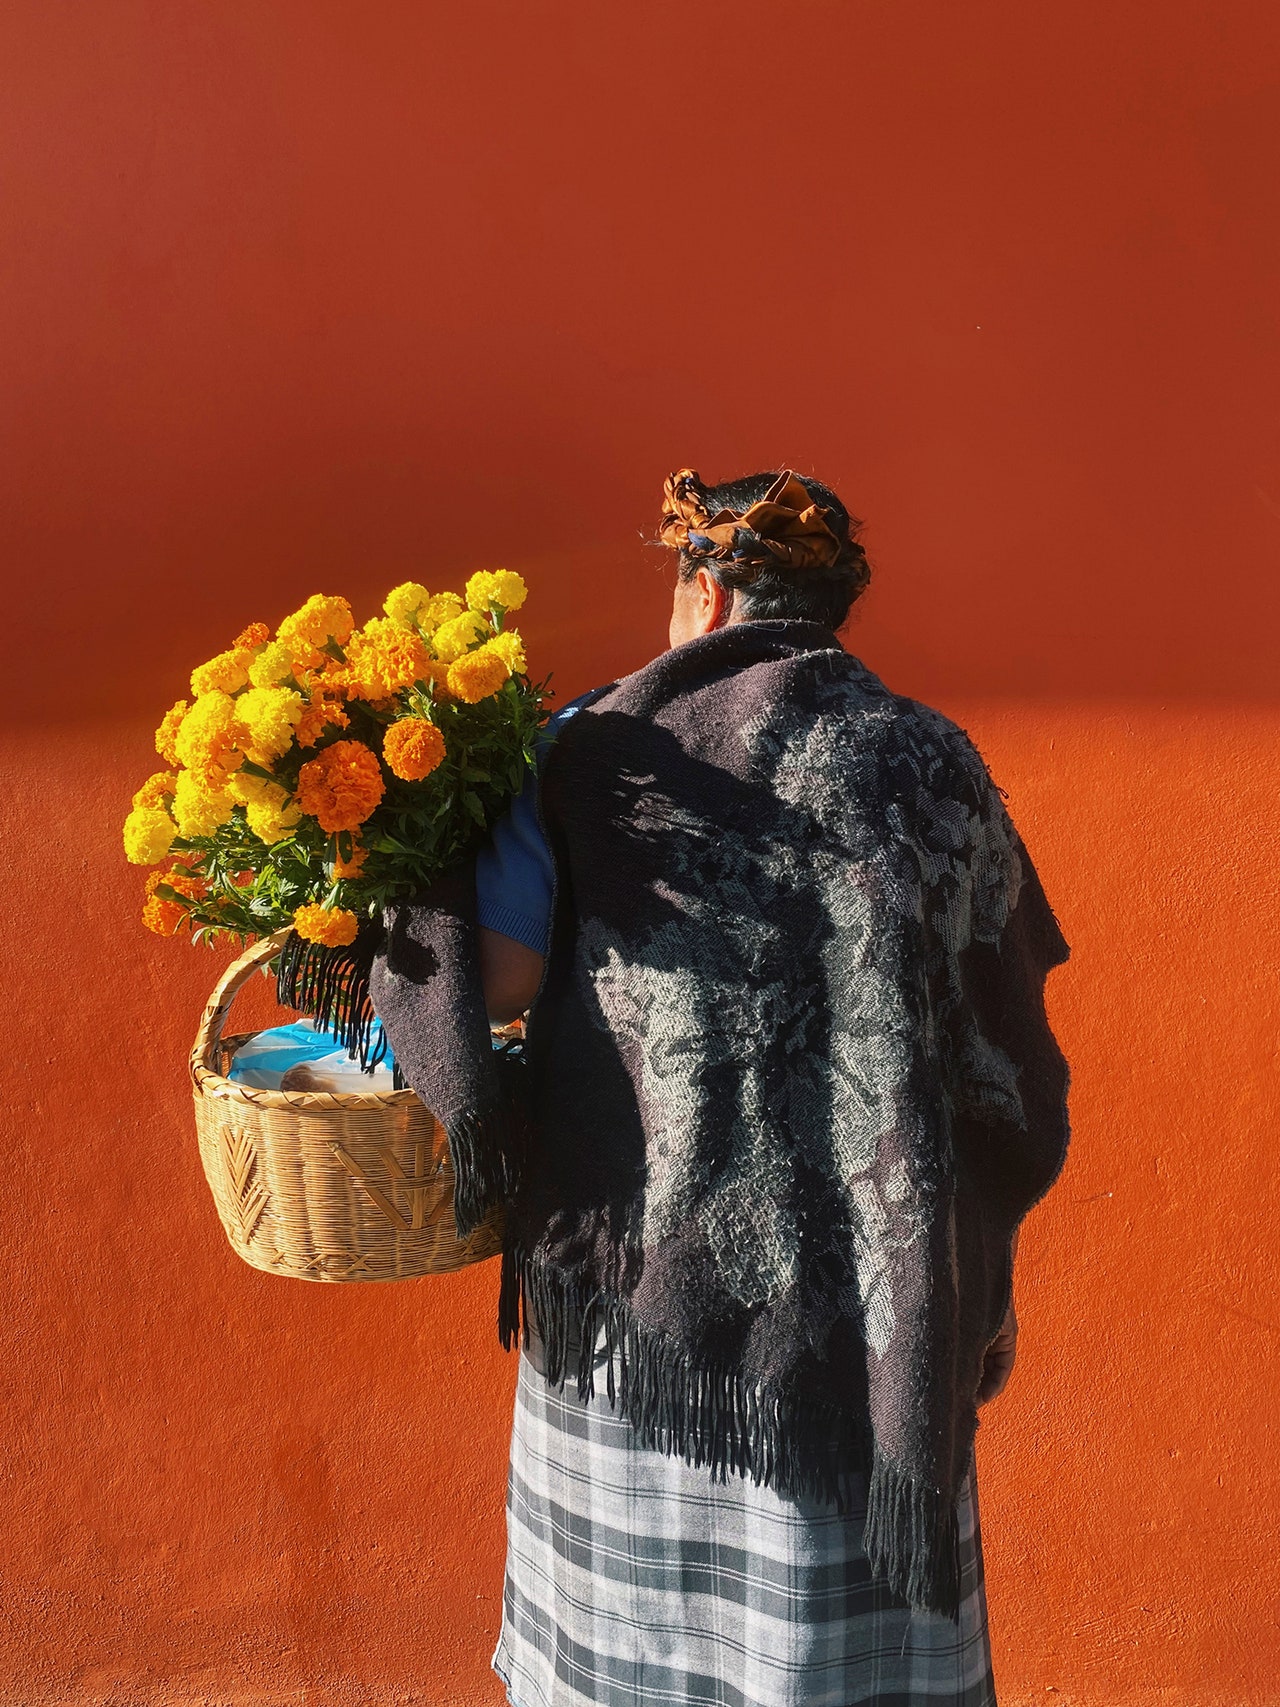 A color photograph features an Indigenous woman standing with her back to the camera in front of a bright orange wall. Its top half is in a shadow, and the bottom is in the sun. The woman holds a large bouquet of lush, yellow flowers and a light-tan woven basket. She wears a long, plaid skirt and a patterned shawl in grey. She looks slightly to the left, so that we see only her cheek and ear.